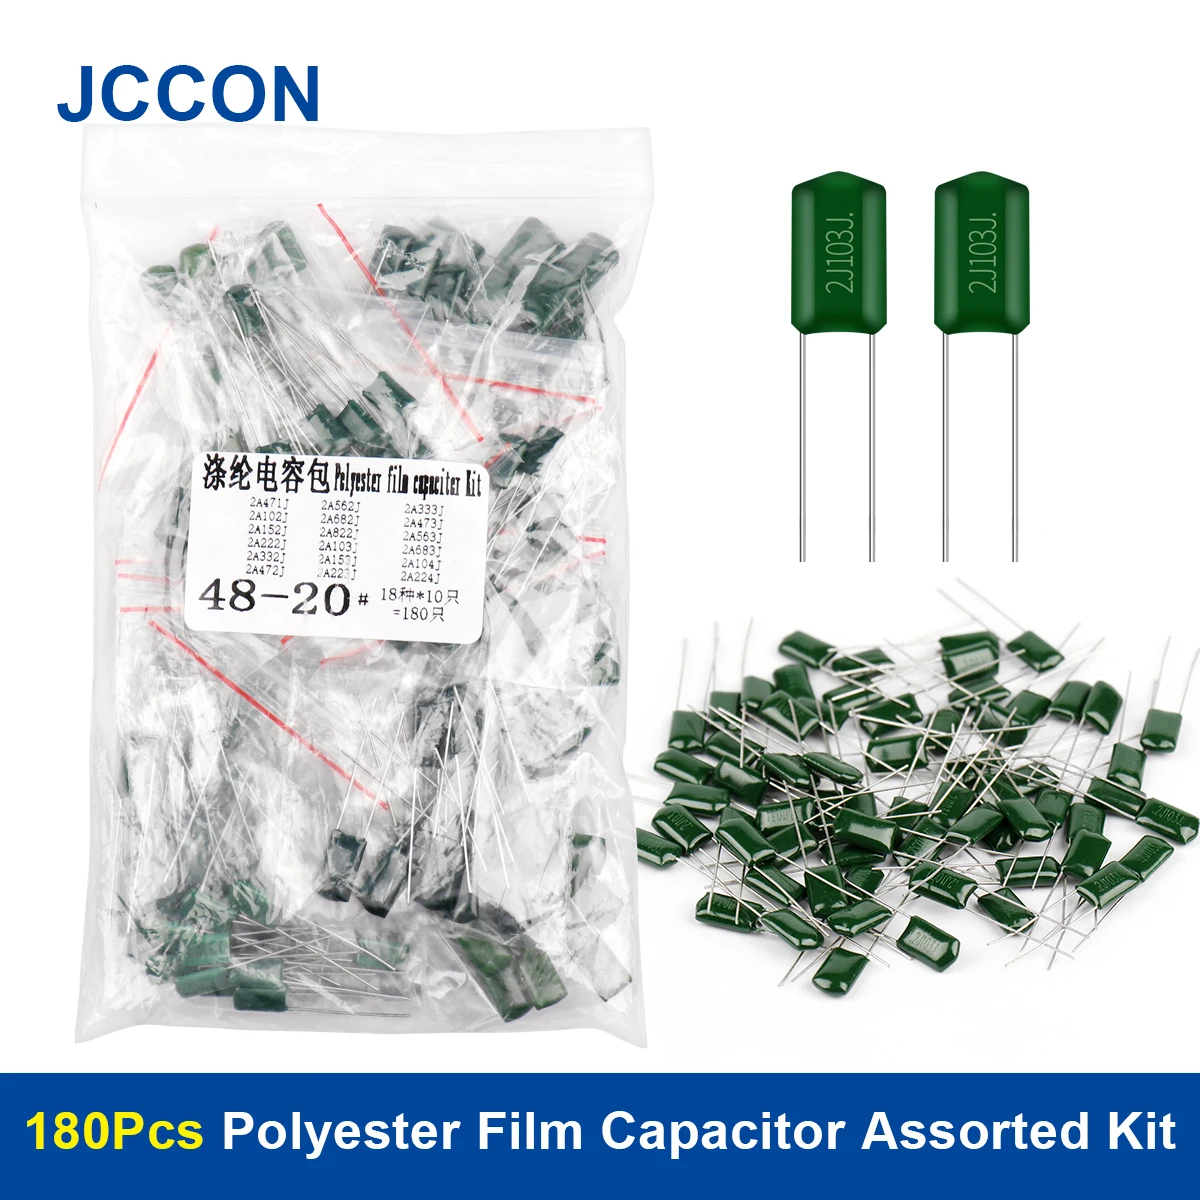 

180Pcs Polyester Film Capacitor Assorted Kit 18Values x 10Pcs 2A471J 2A102J 2A152J 2A222J 2A332J 2A472J 2A562J